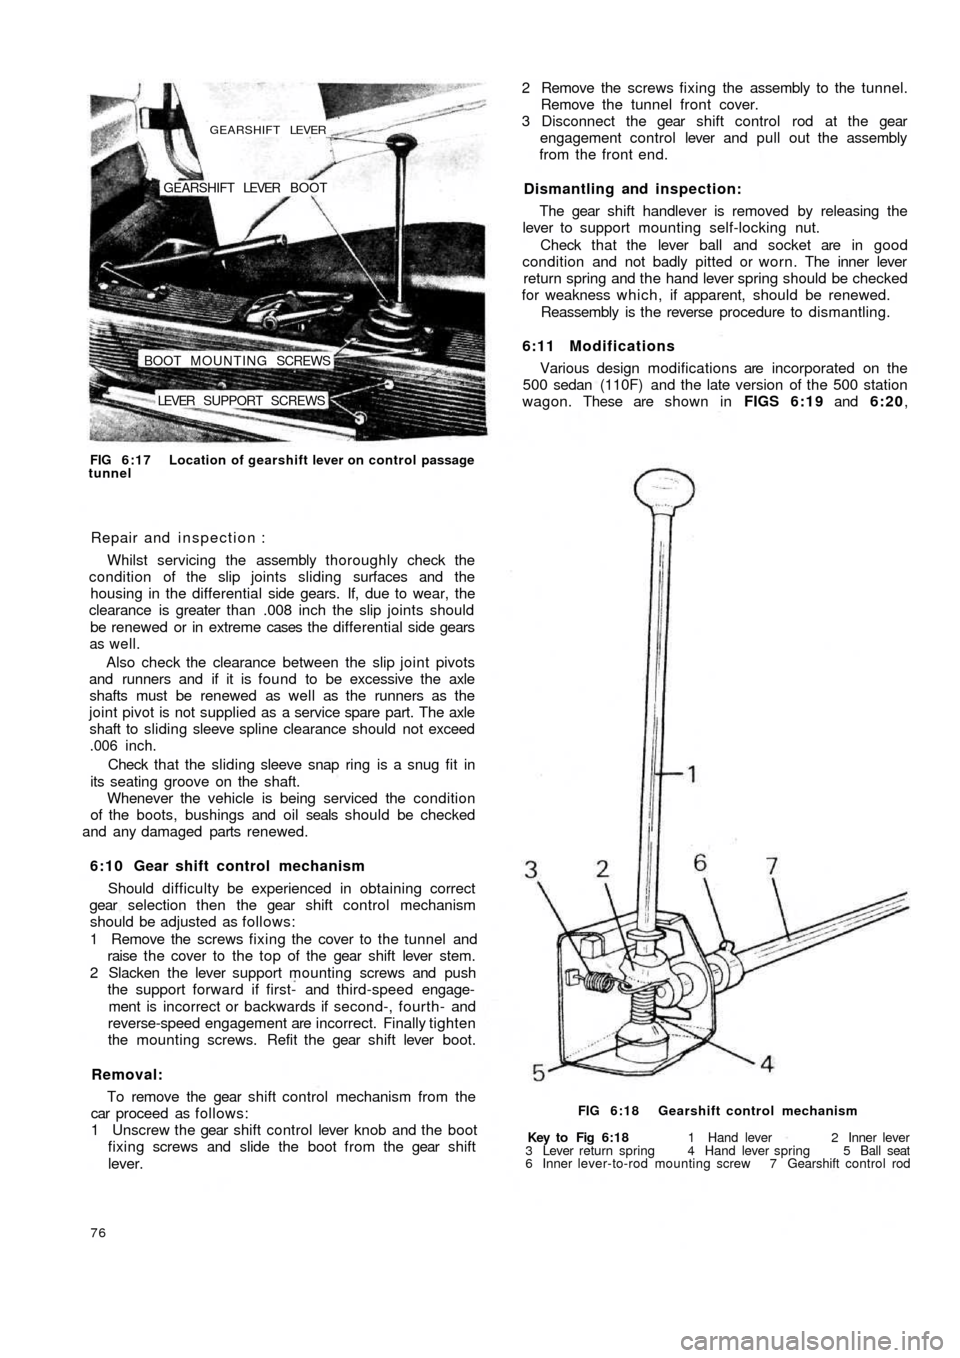 FIAT 500 1971 1.G Repair Manual LEVER  SUPPORT SCREWS BOOT MOUNTING SCREWSGEARSHIFT LEVER  BOOT
GEARSHIFT LEVER
FIG 6:17 Location of gearshift lever on control  passage
tunnel
Repair and inspection :
Whilst servicing the assembly th